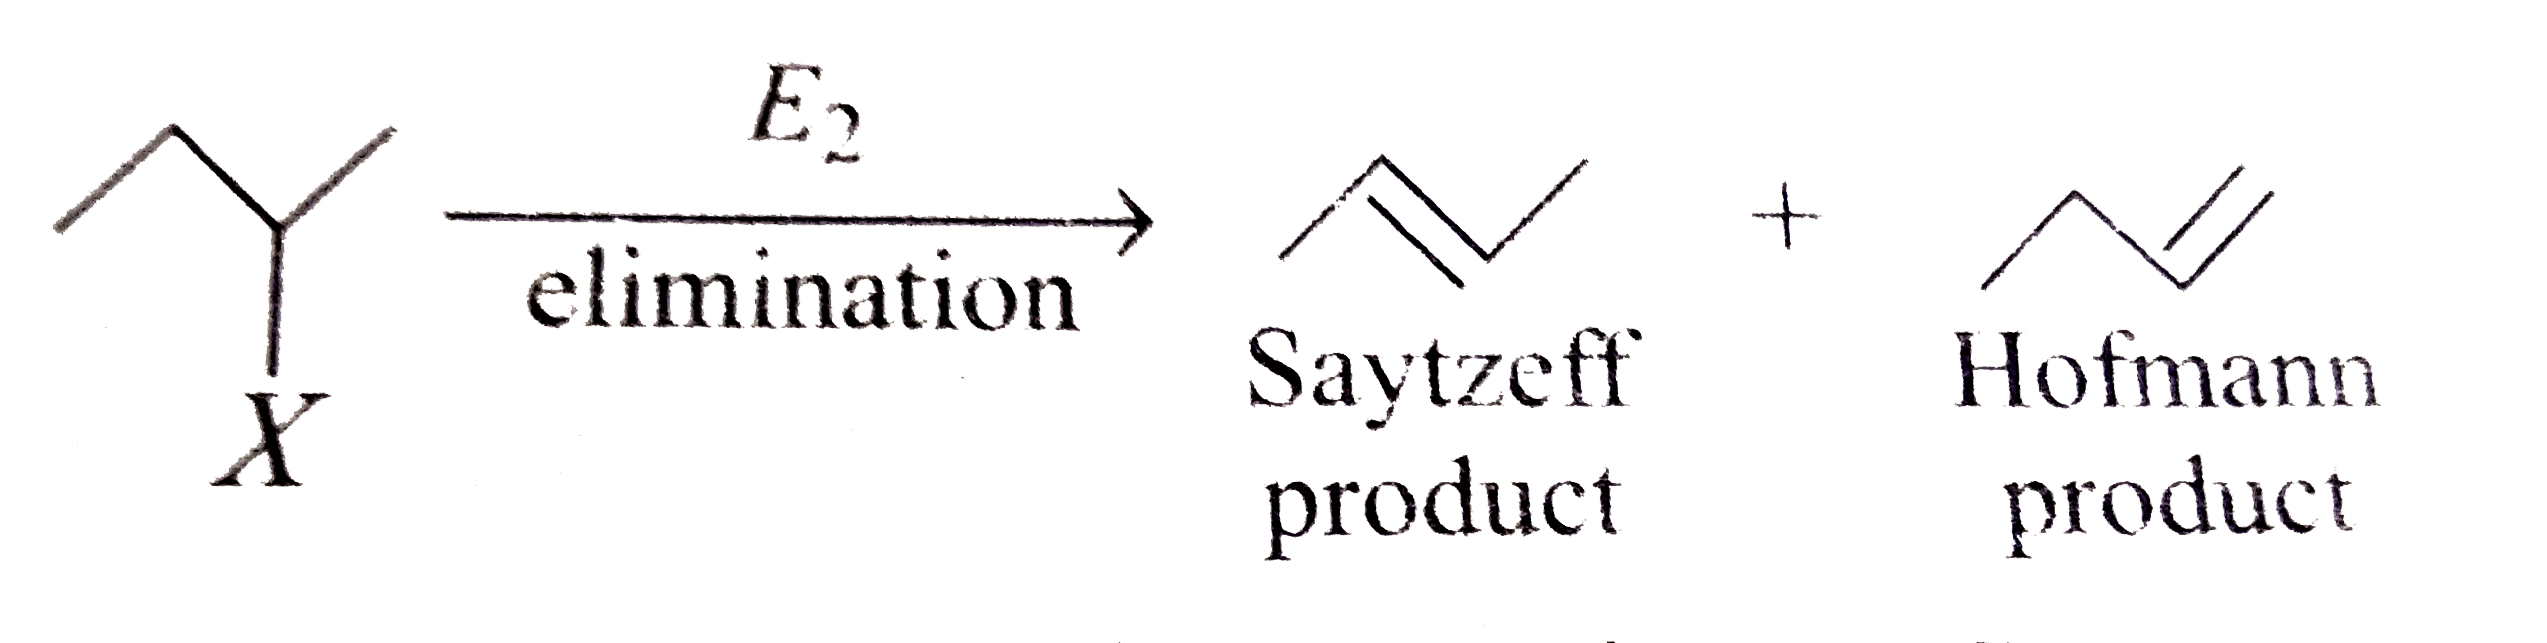 In the above reaction, maximum Saytzeff product will be obtained where X is :